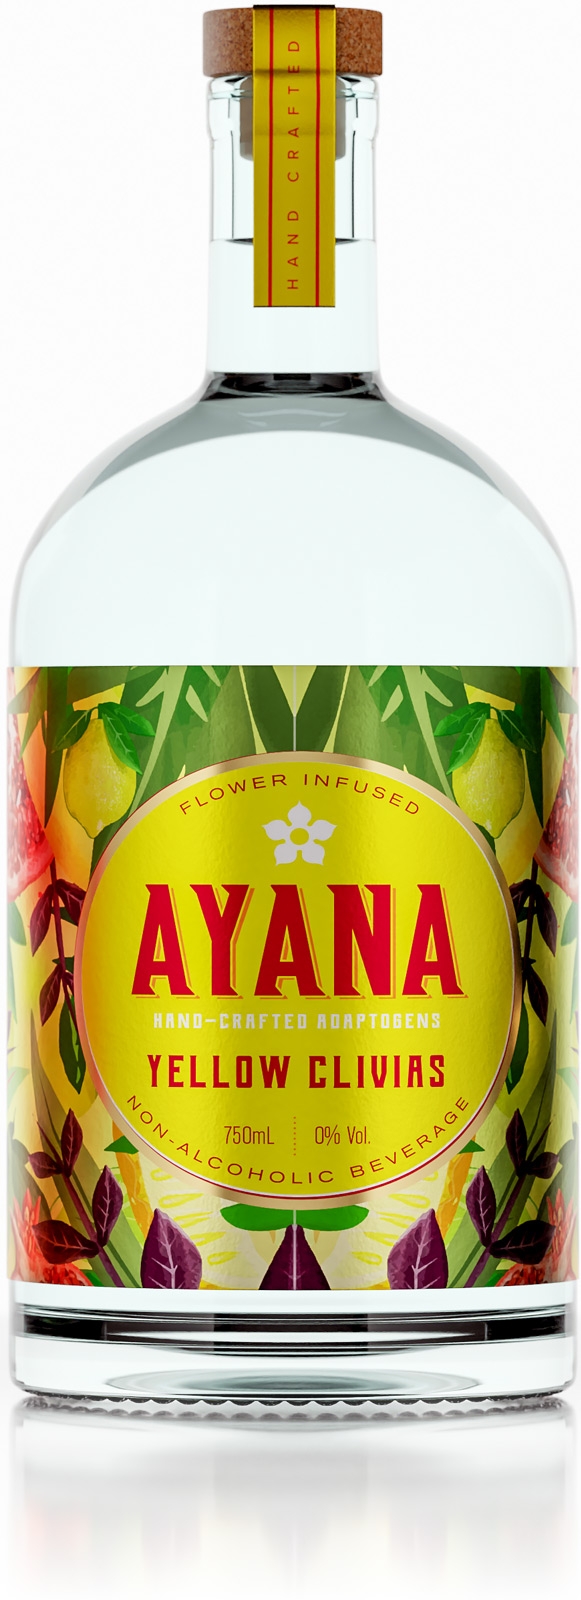 Rendering of Ayans bottle with label design.